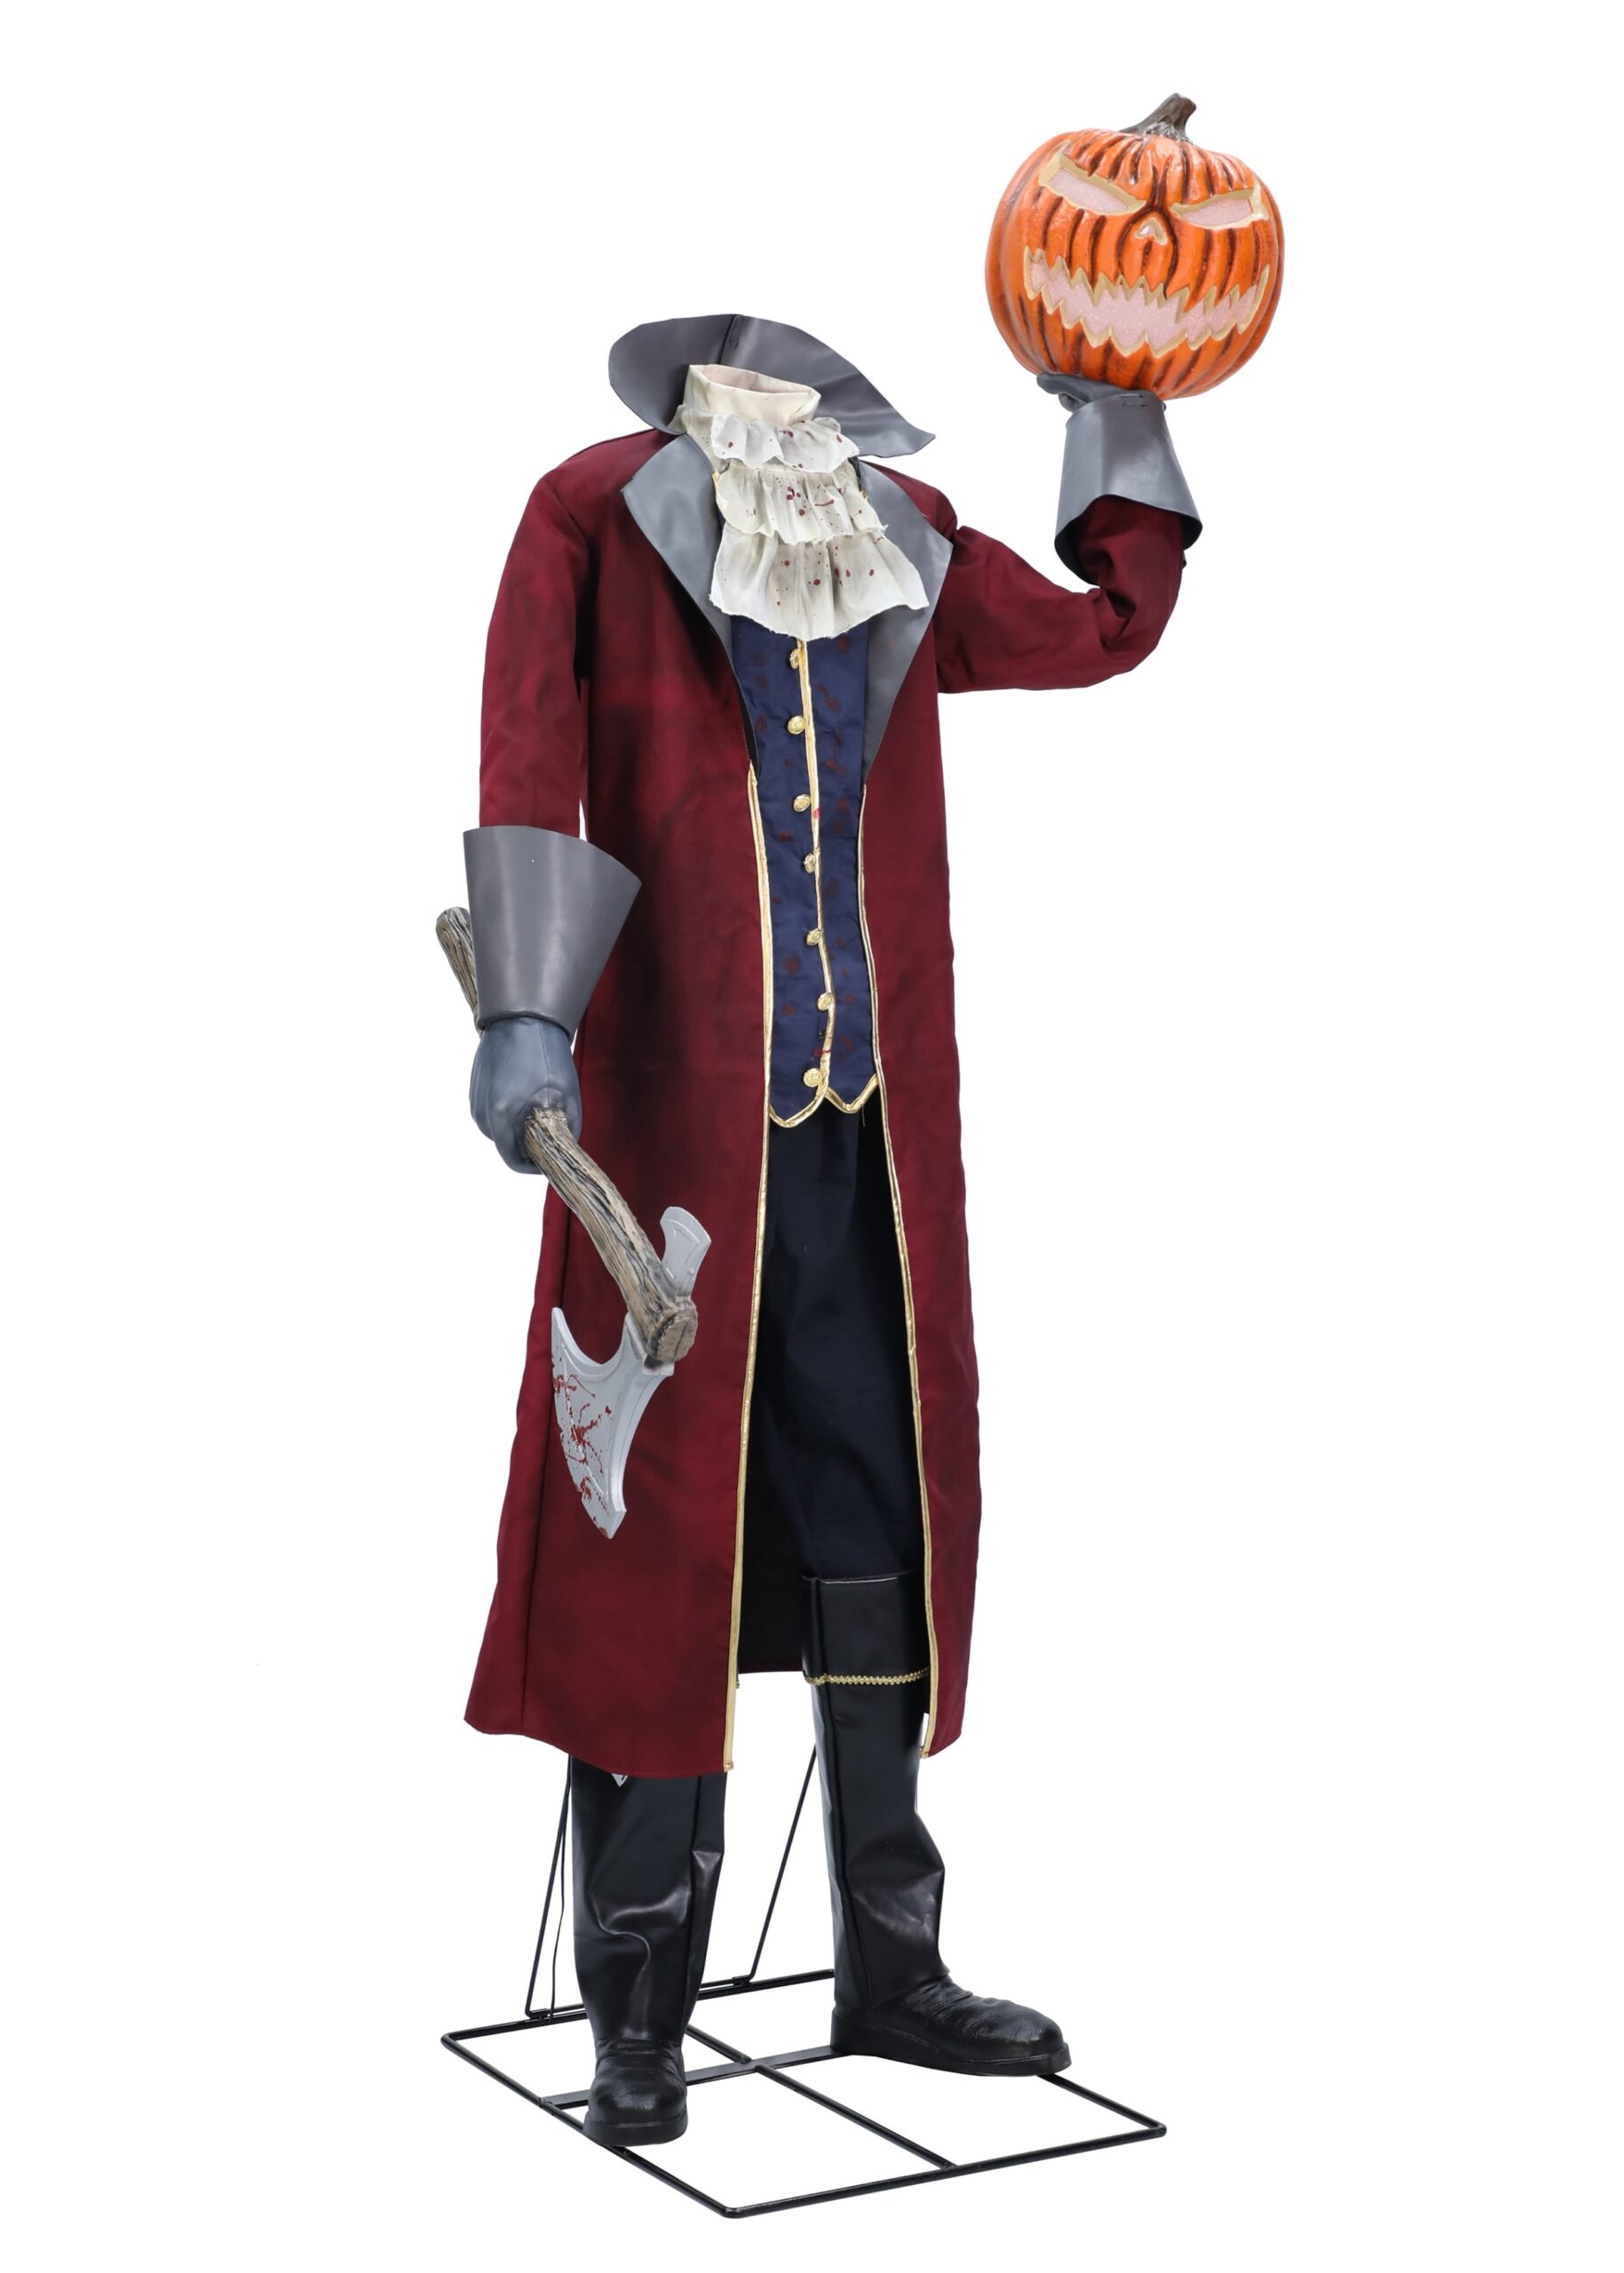 headless horseman decoration Niche Utama Home Way to Celebrate Halloween  Ft Tall Plug-in Light-up with Sound  Multicolored Animated Headless Horseman with Polyester Costume Life size  Decoration